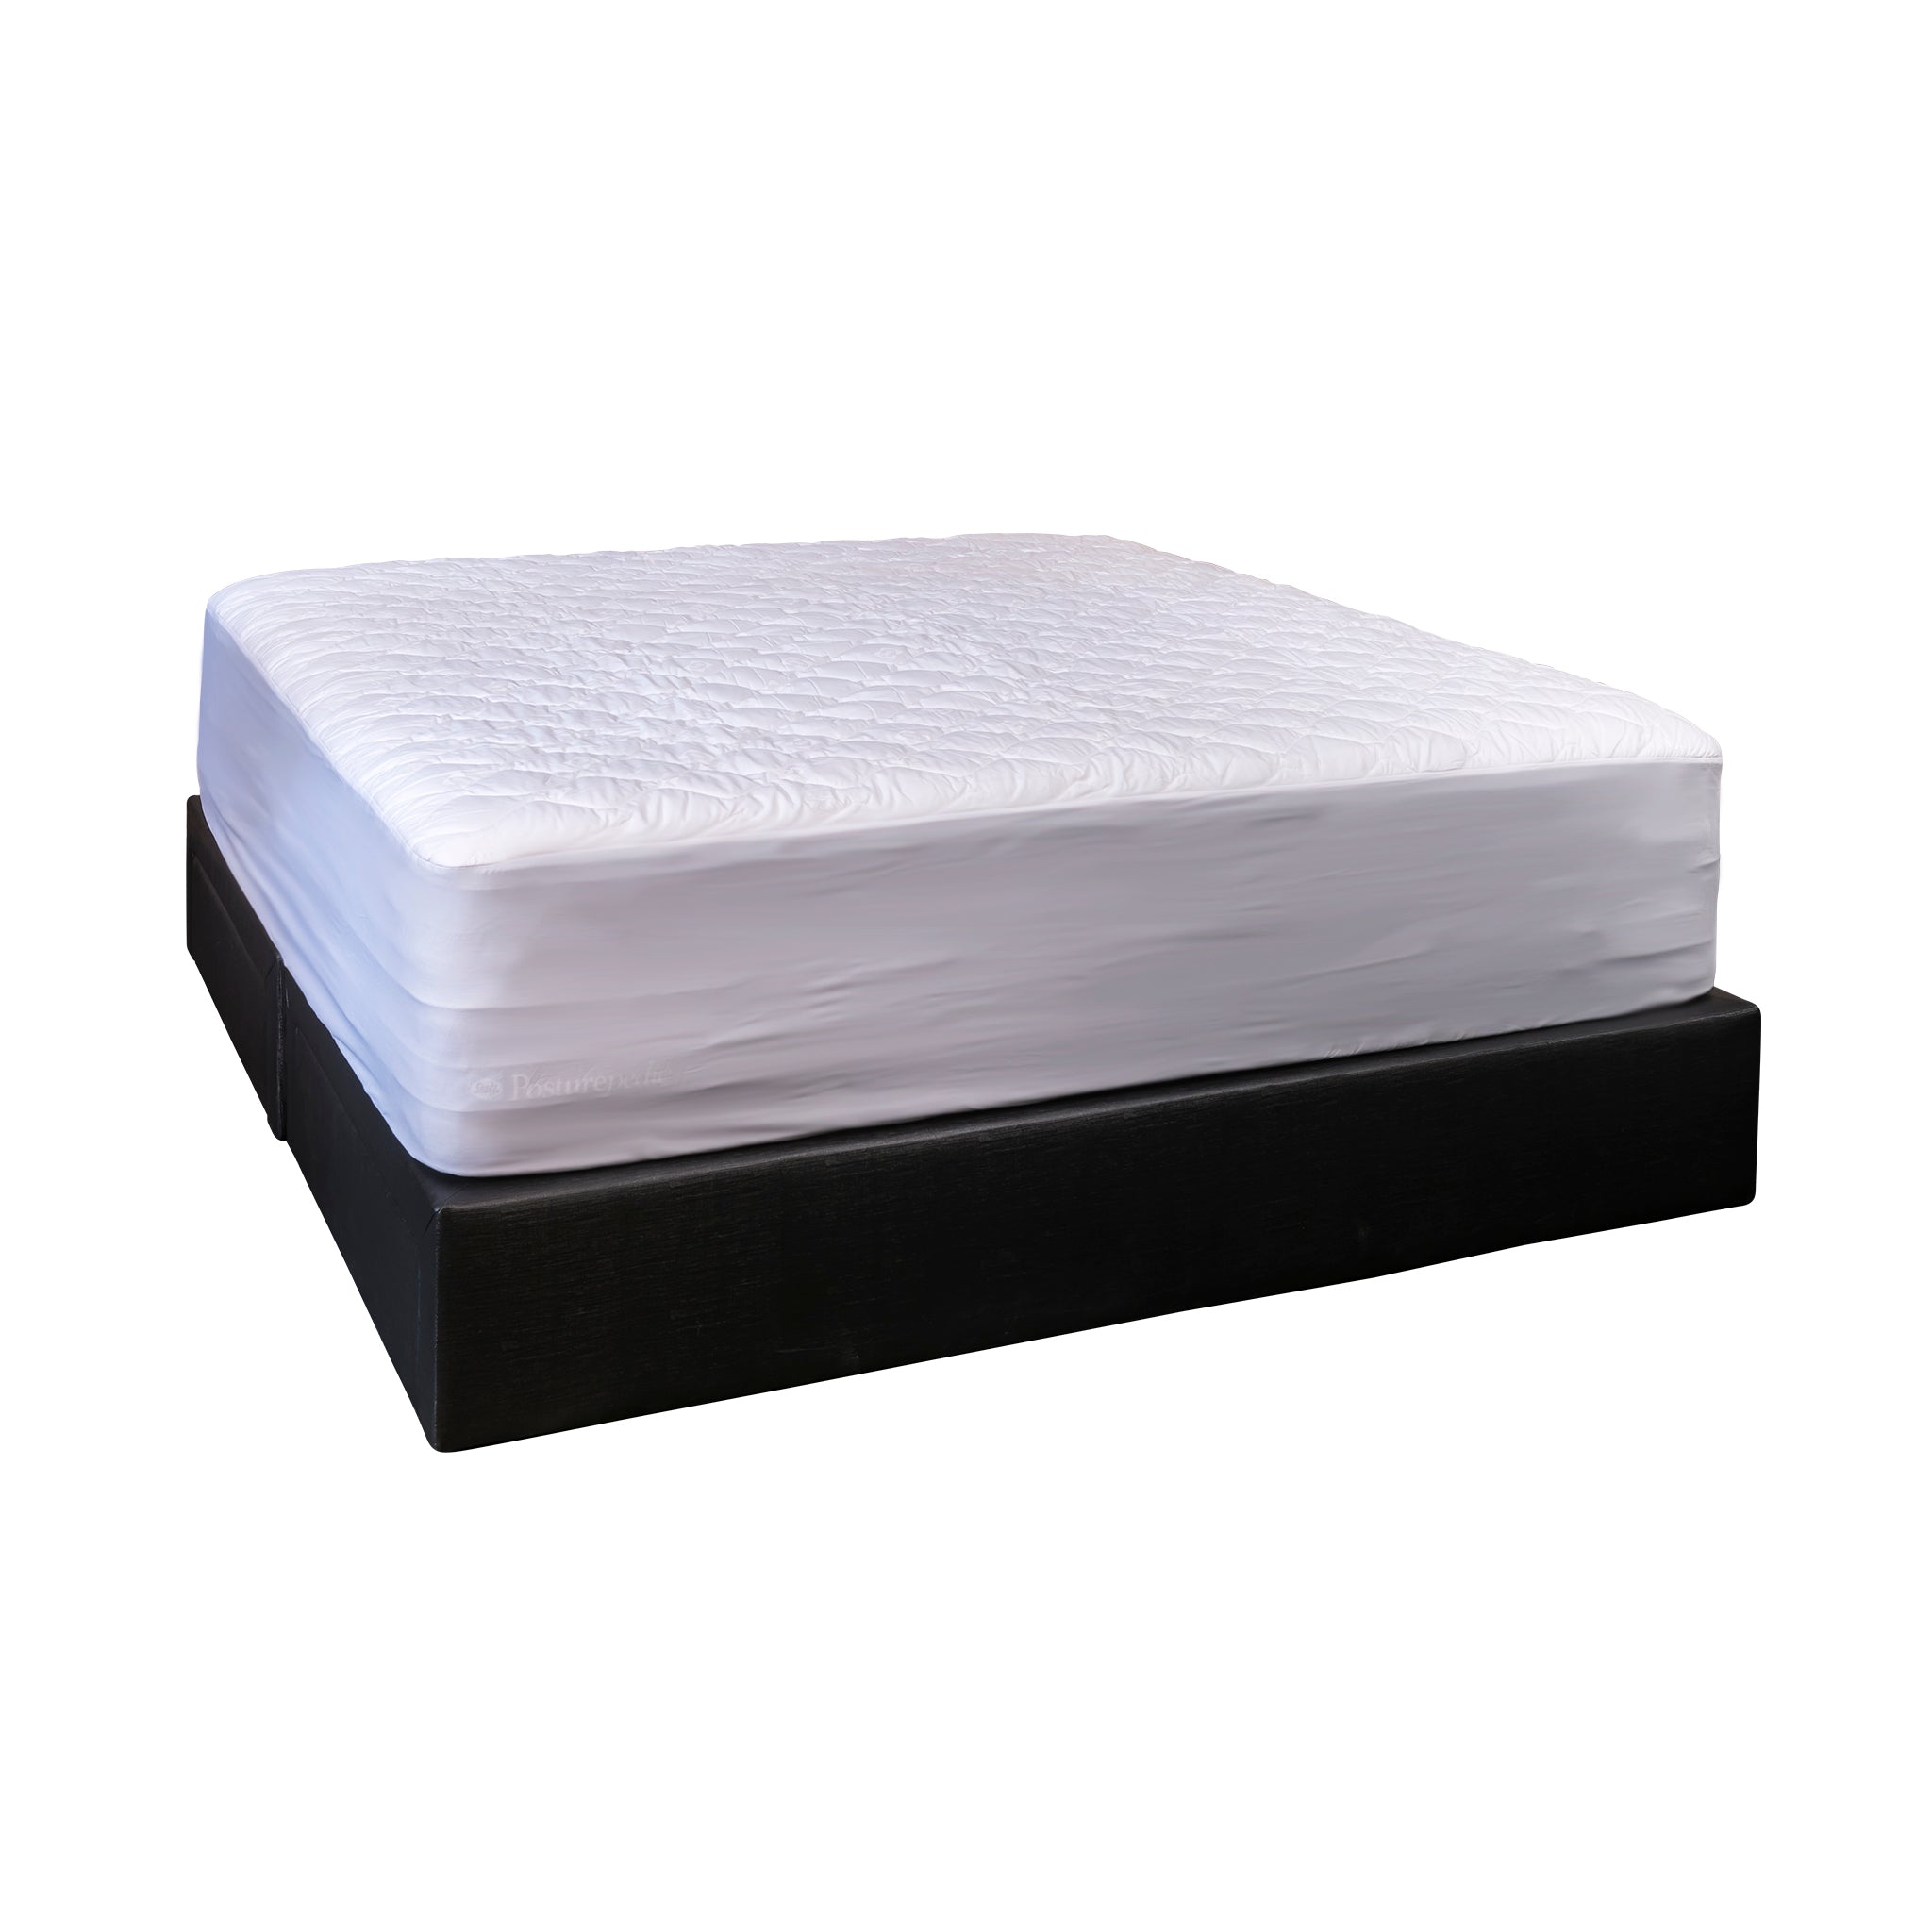 WATER RESISTANT FITTED MATTRESS PROTECTOR